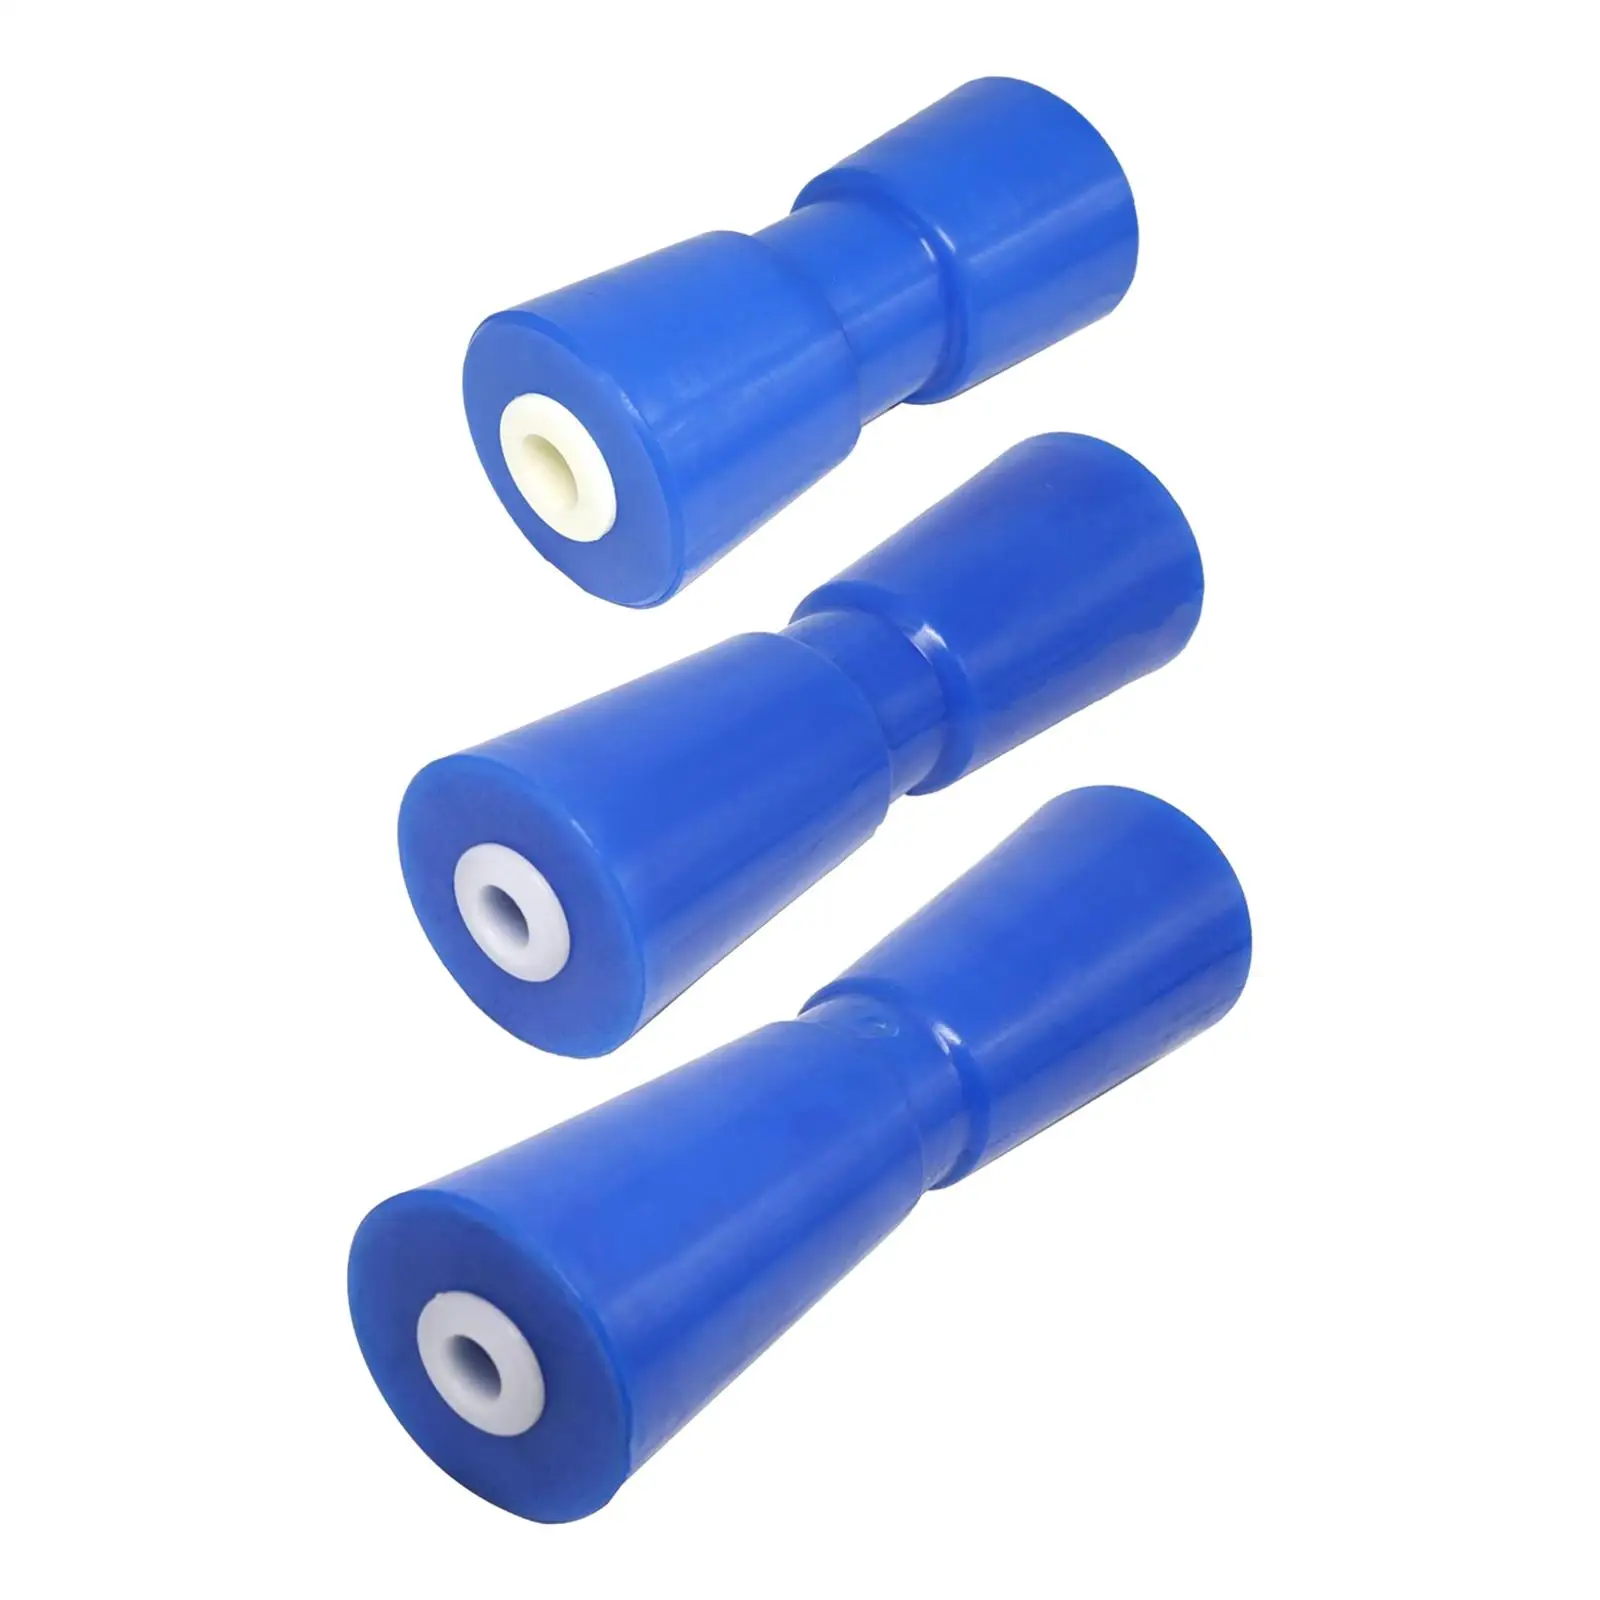 Boat Trailer Roller Bow Roll Smoothly Blue Rolling Tool Heavy Duty for Ship Motorboat Boats Fittings Direct Replaces